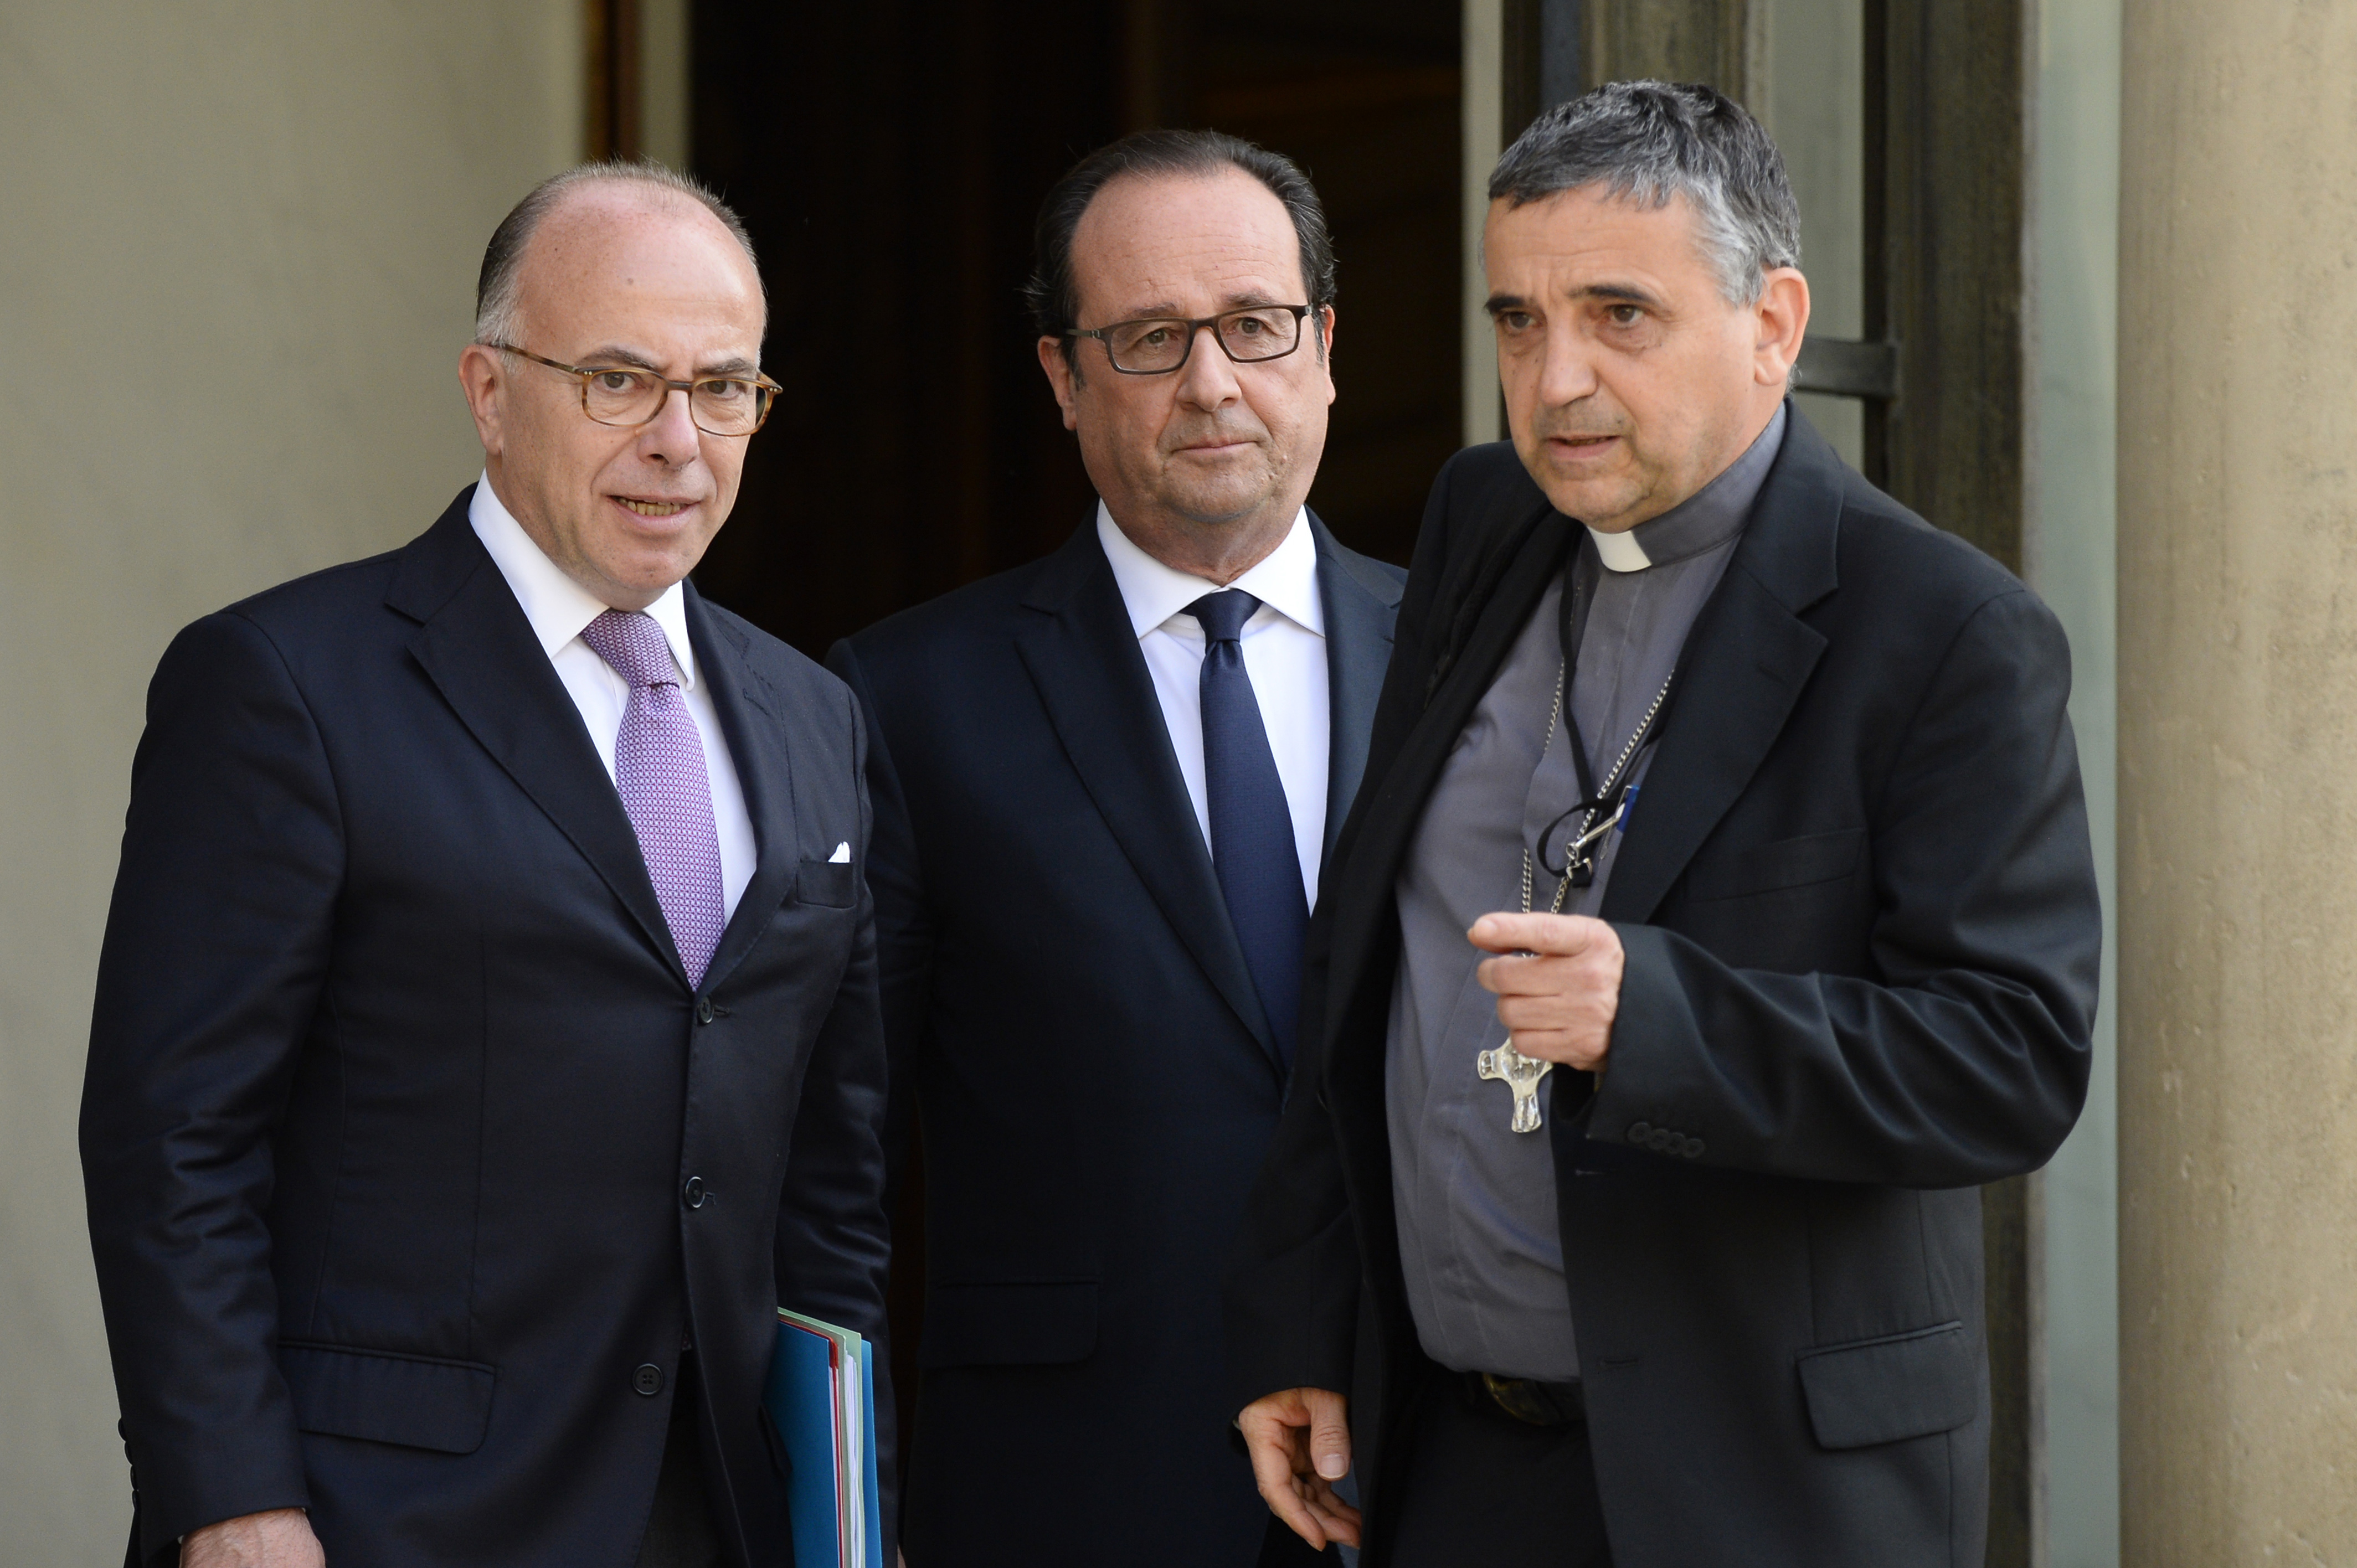 Archbishop of Rouen Dominique Lebrun (R) leaves after a meeting with French President Francois Hollande (C) and French Interior Minister Bernard Cazeneuve (L) on July 26, 2016 at the Elysee Palace in Paris, after a priest was killed earlier today in the Normandy city of Saint-Etienne-du-Rouvray.  Francois Hollande said that two men who attacked a church and slit the throat of a priest had "claimed to be from Daesh", using the Arabic name for the Islamic State group. Police said they killed two hostage-takers in the attack in the Normandy town of Saint-Etienne-du-Rouvray, 125 kilometres (77 miles) north of Paris. / AFP PHOTO / BERTRAND GUAY